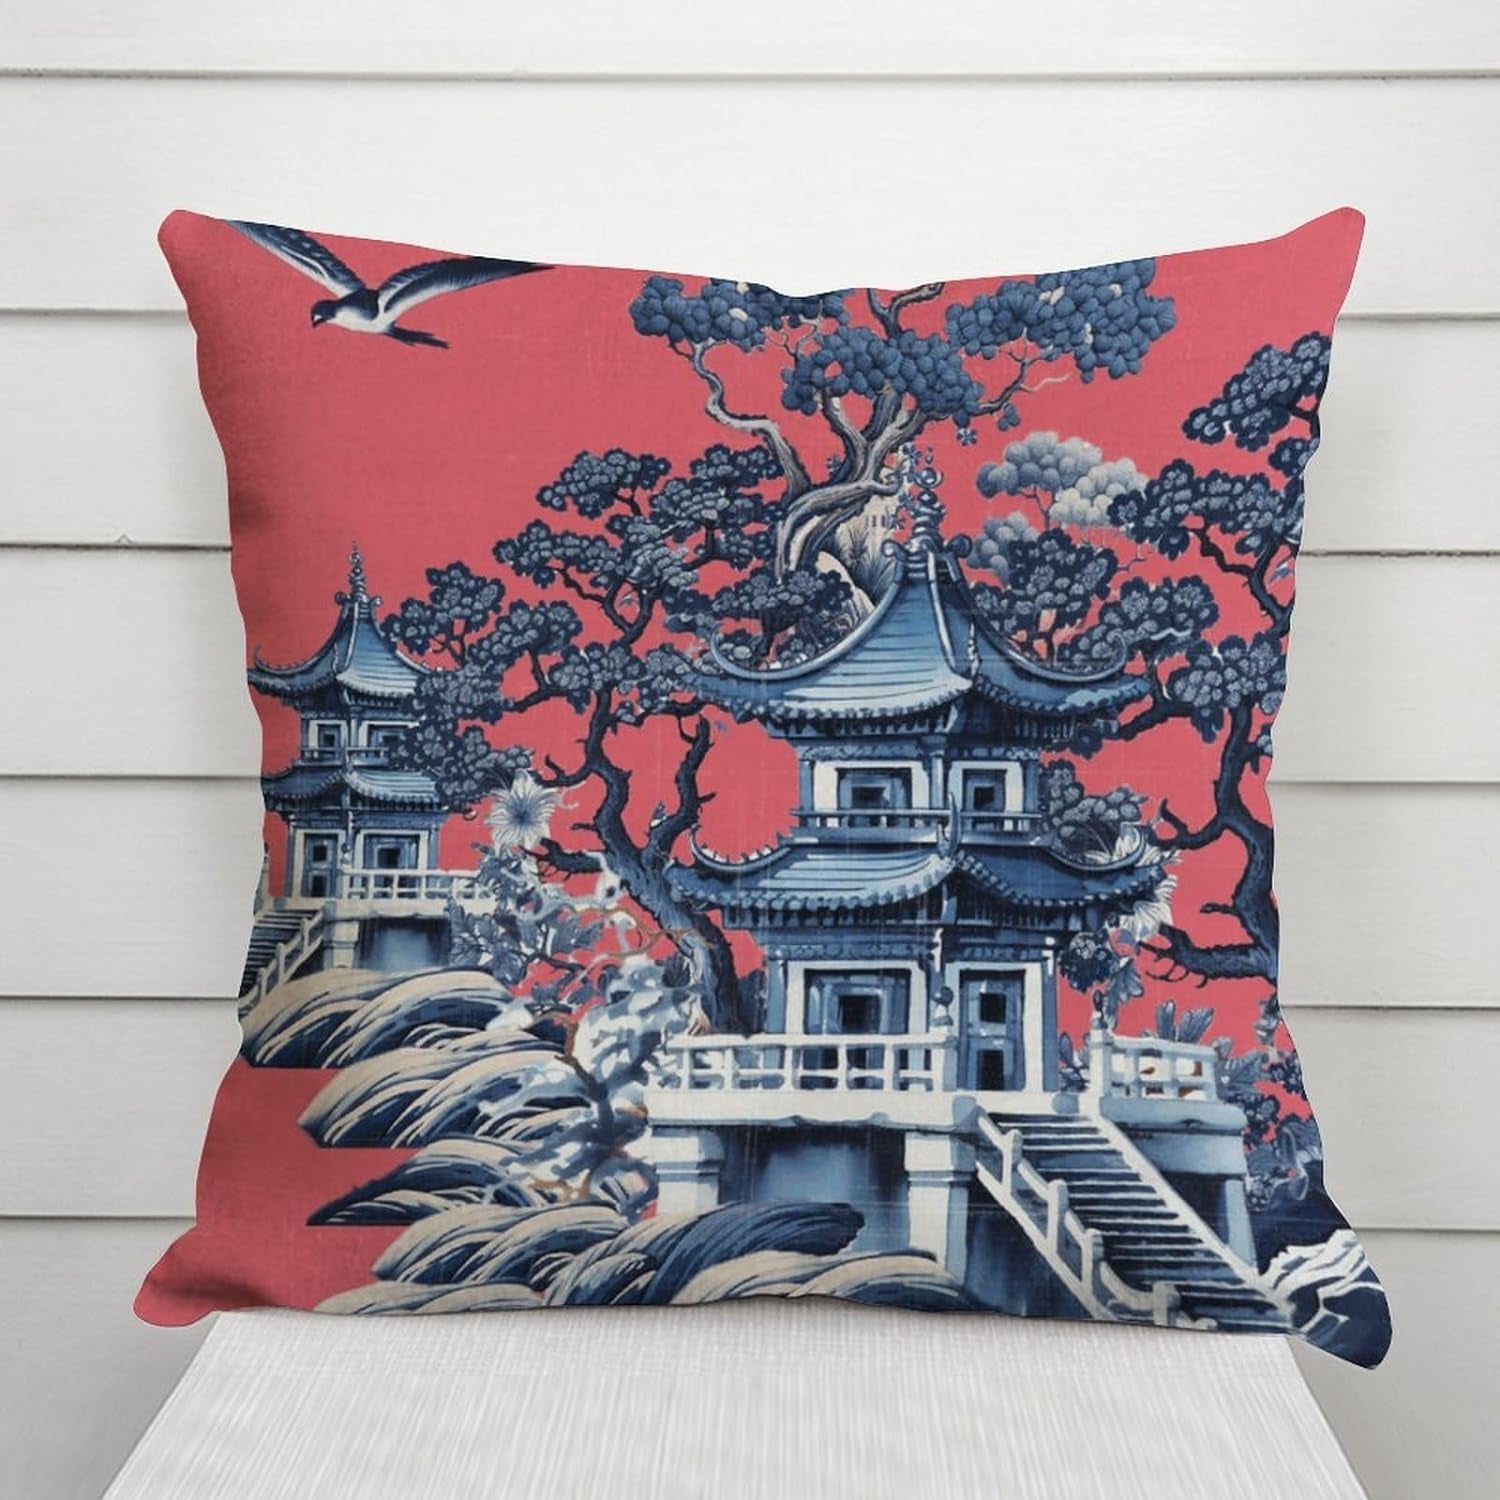 Decorative Pillow Cover Pink Blue Chinoiserie Pillow Square Made to Order Pillow Cover 18X18 Throw Pillow Toss Pillow Pagoda Cushion Cover